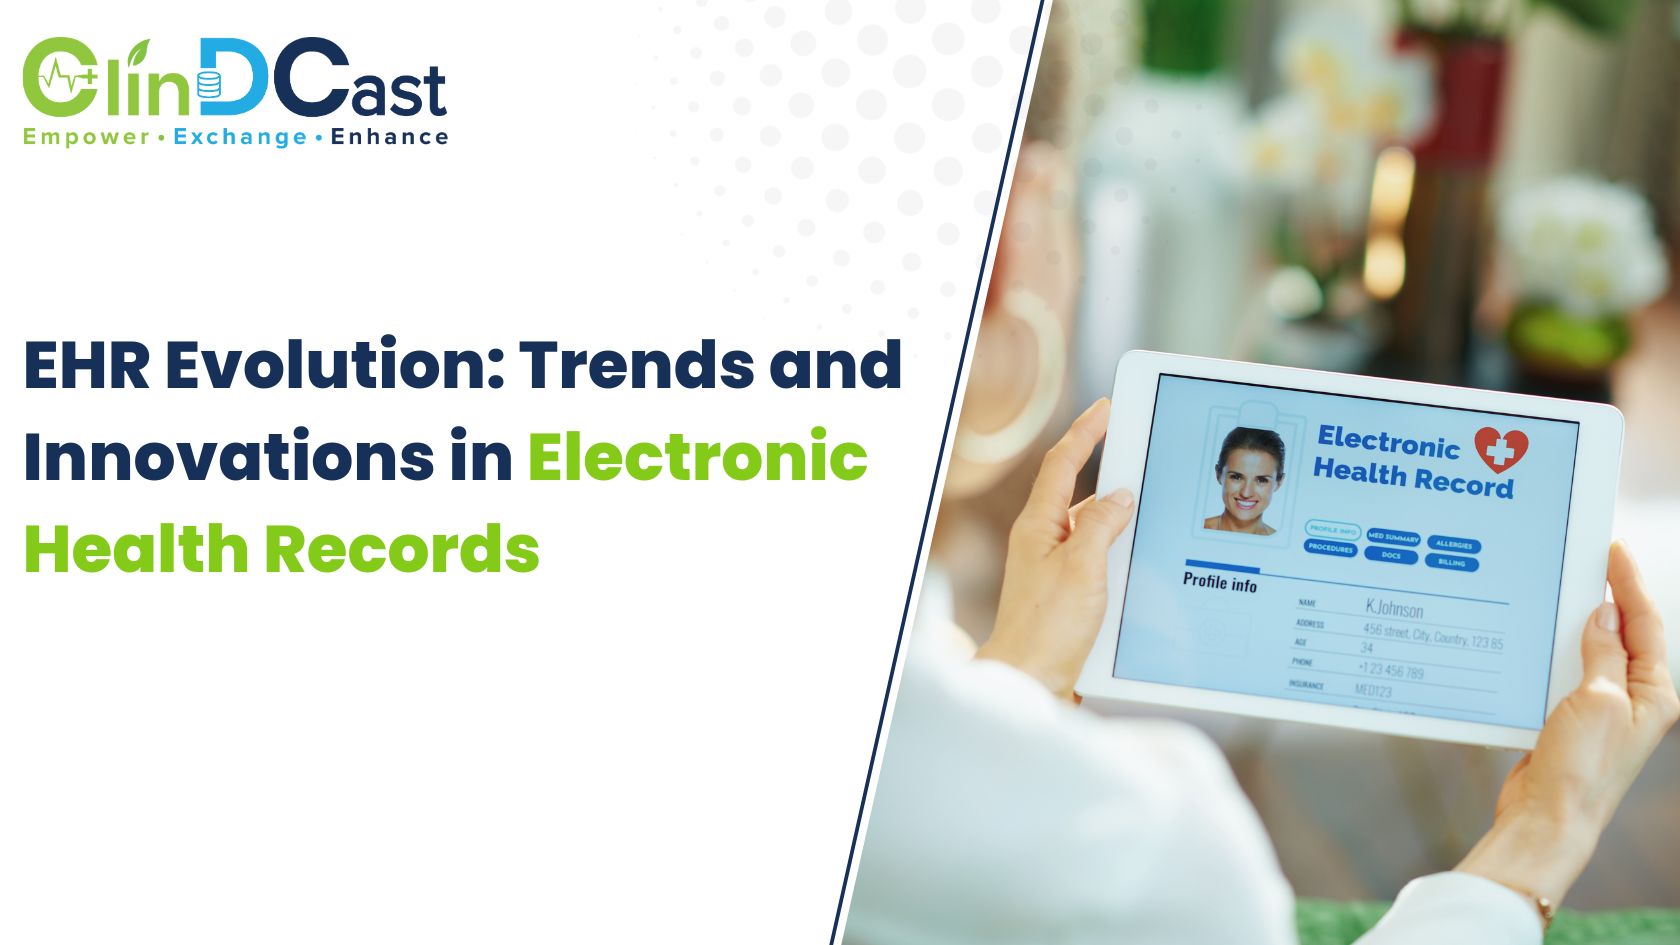 EHR Evolution: Trends and Innovations in Electronic Health Records